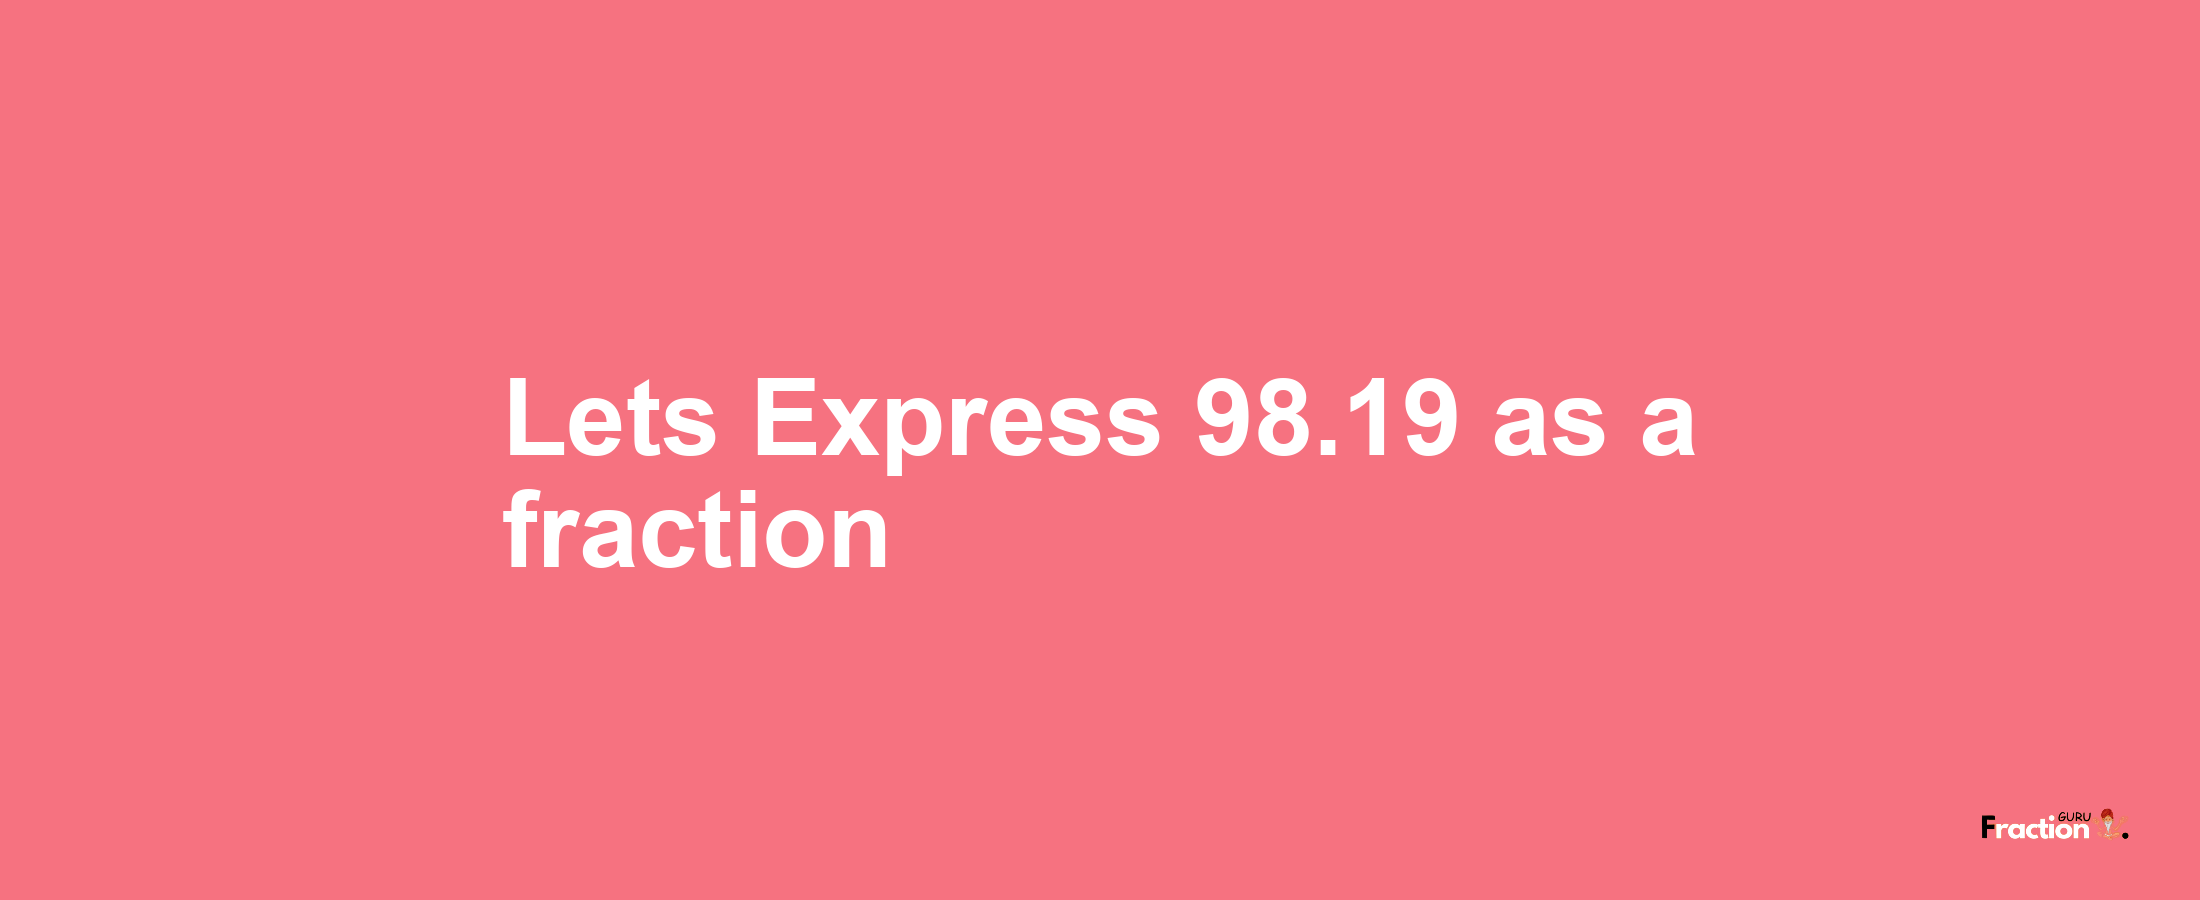 Lets Express 98.19 as afraction